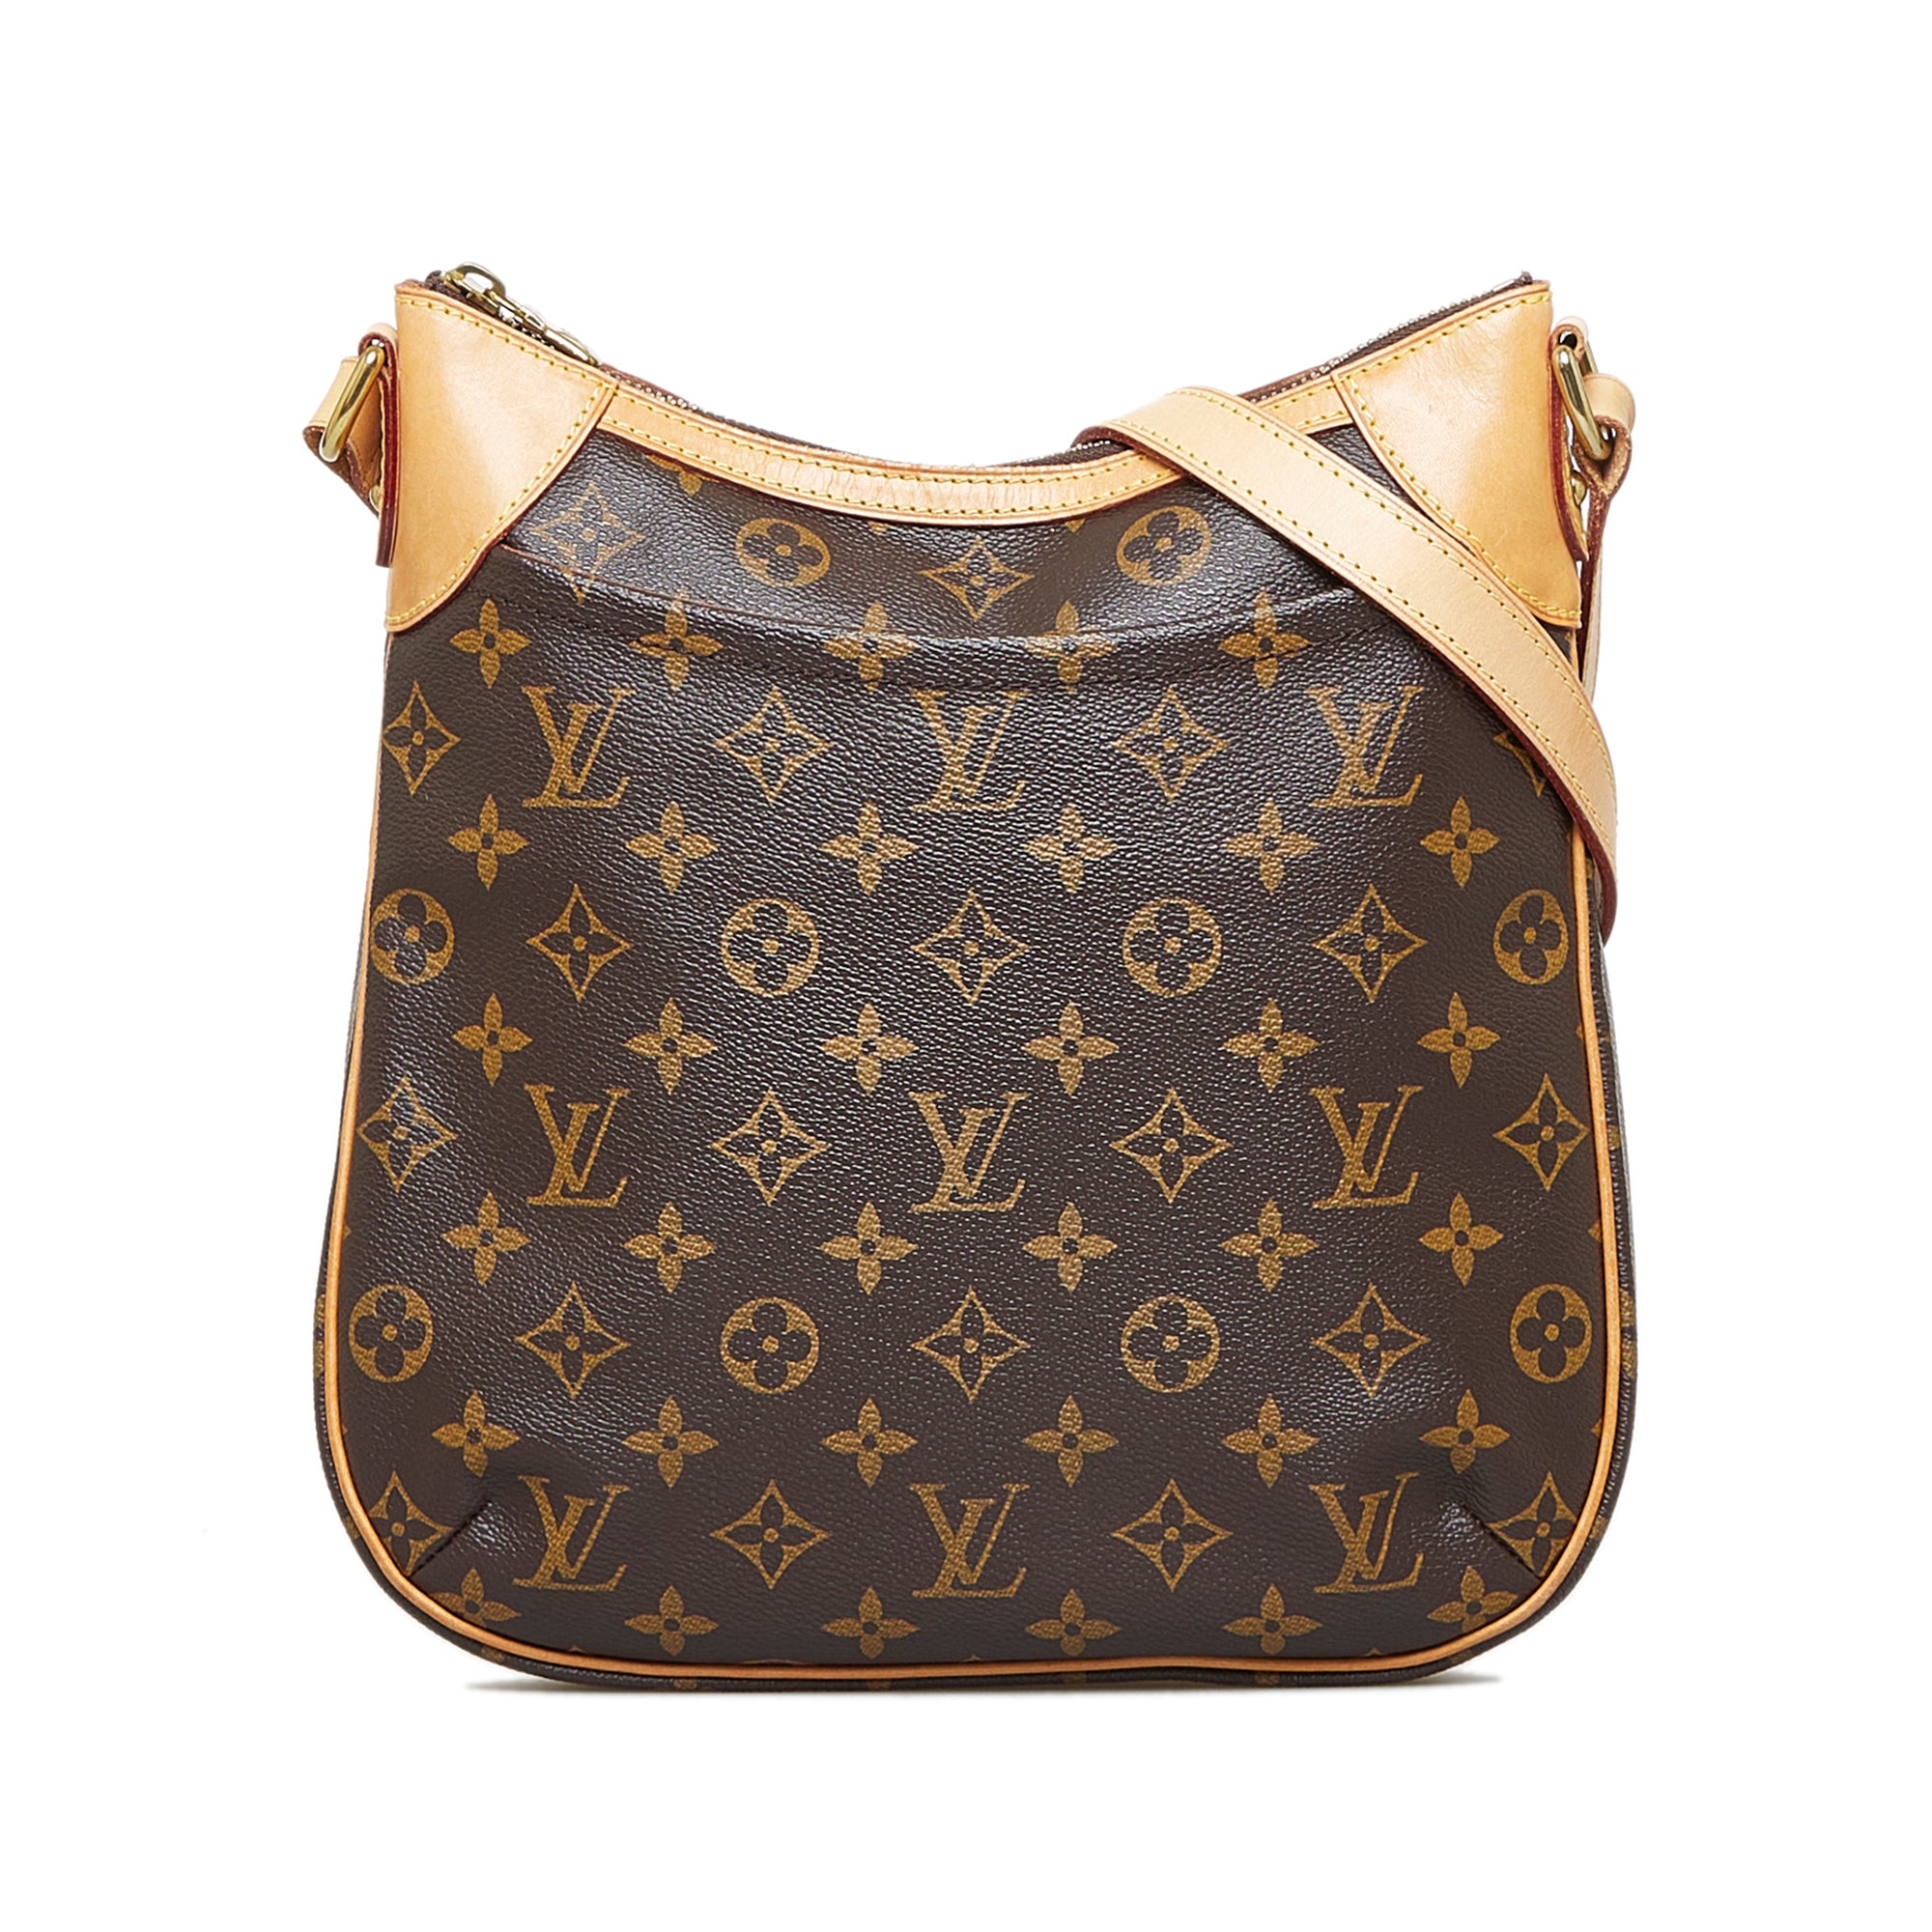 Louis Vuitton Odeon PM, What Fits, My Thoughts